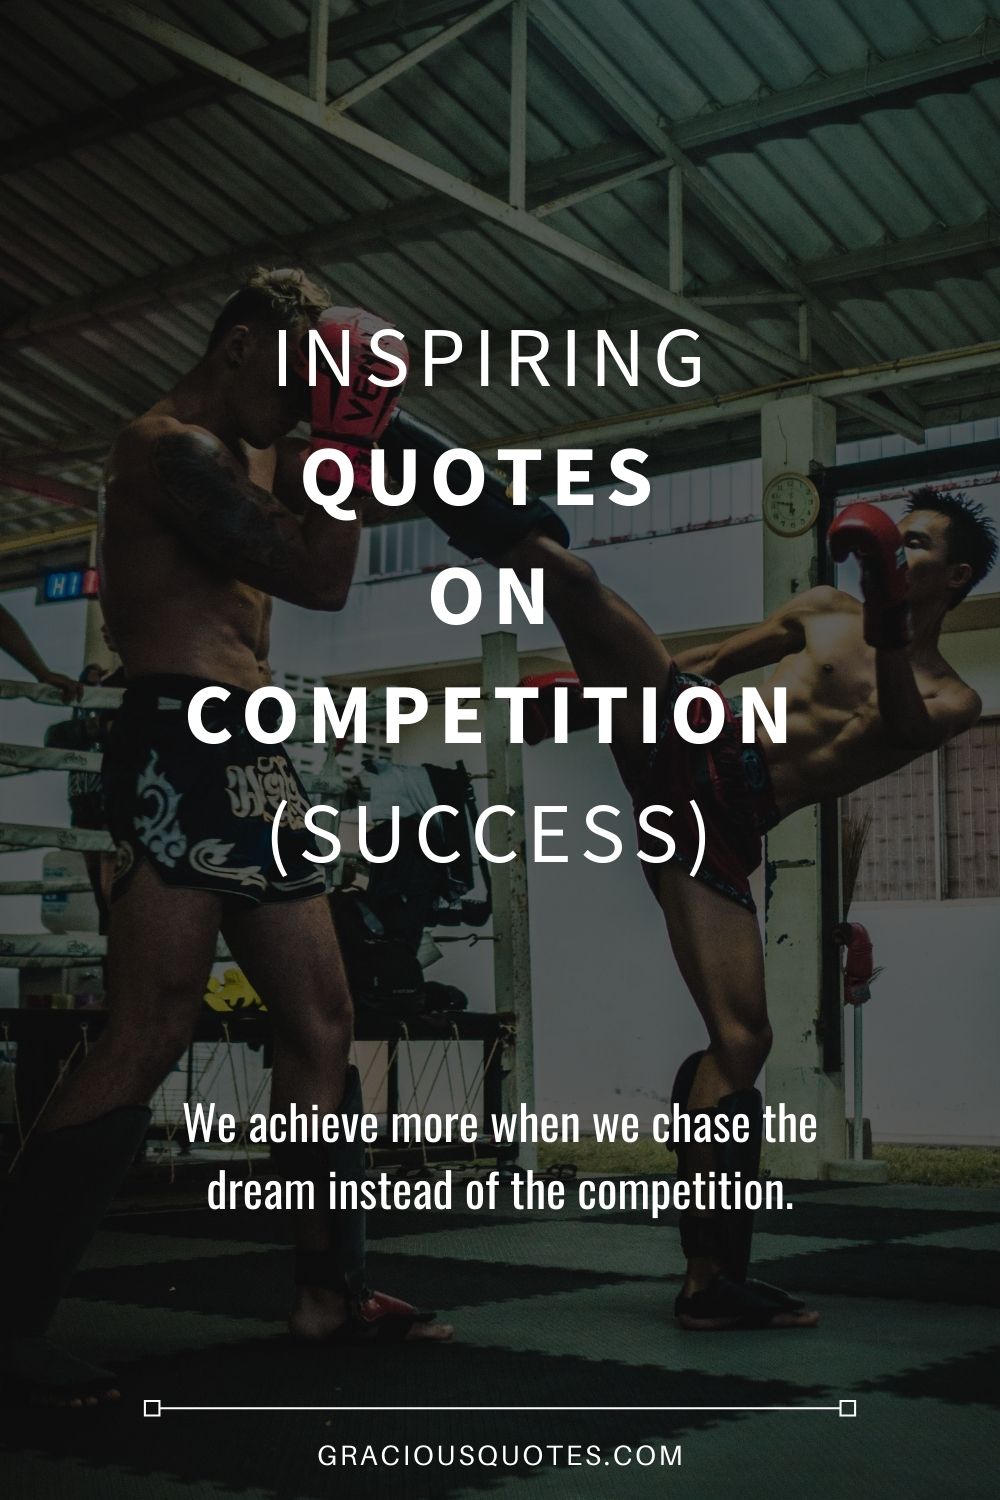 Inspiring Quotes on Competition (SUCCESS) - Gracious Quotes